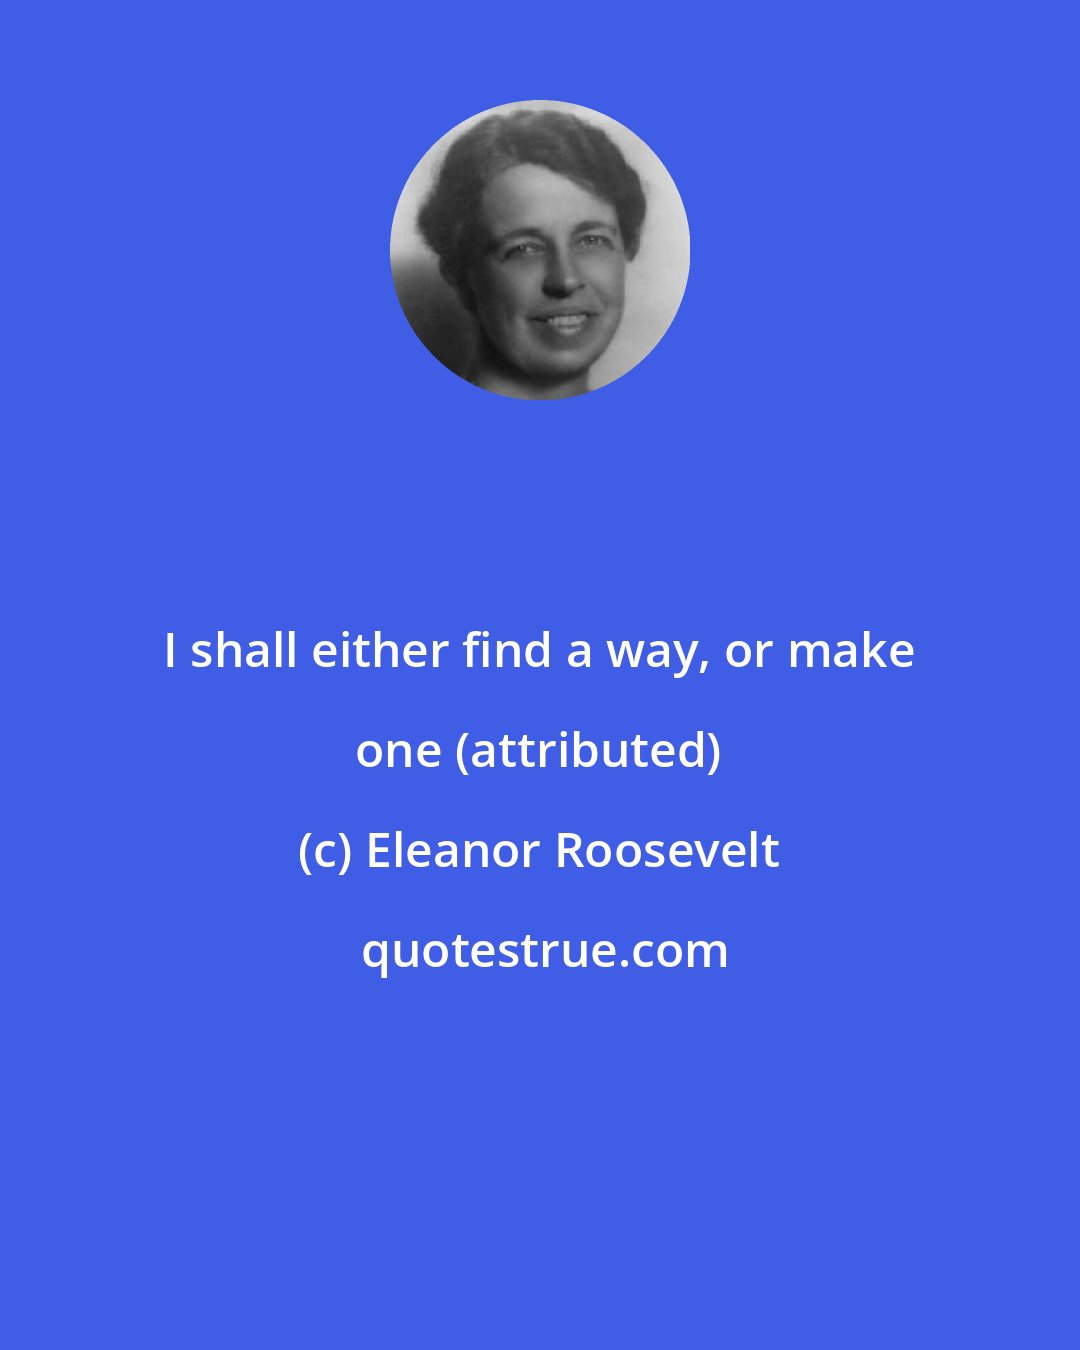 Eleanor Roosevelt: I shall either find a way, or make one (attributed)